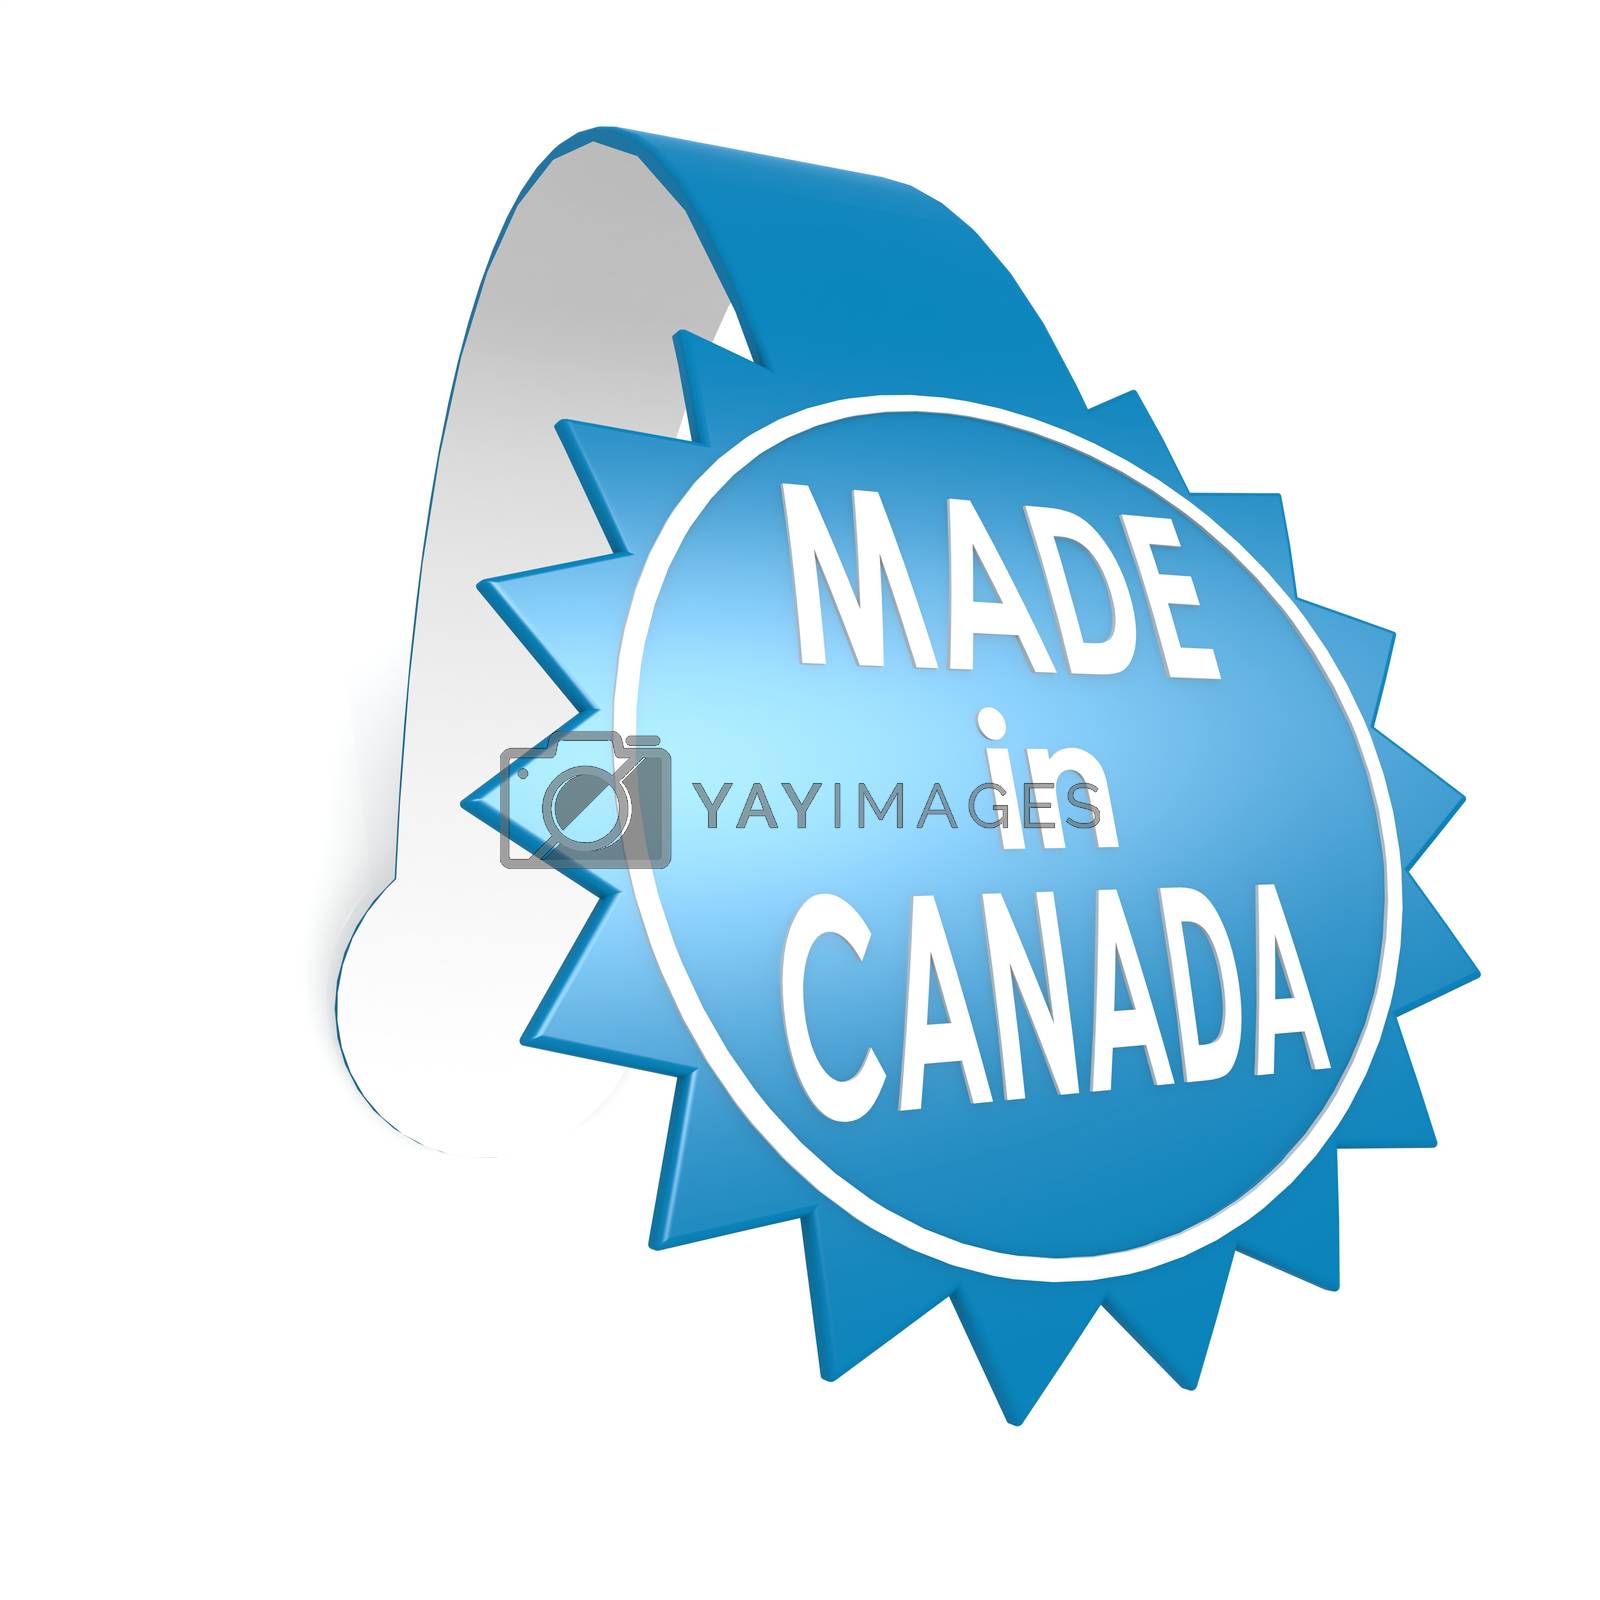 Royalty free image of Blue label made in canada by tang90246